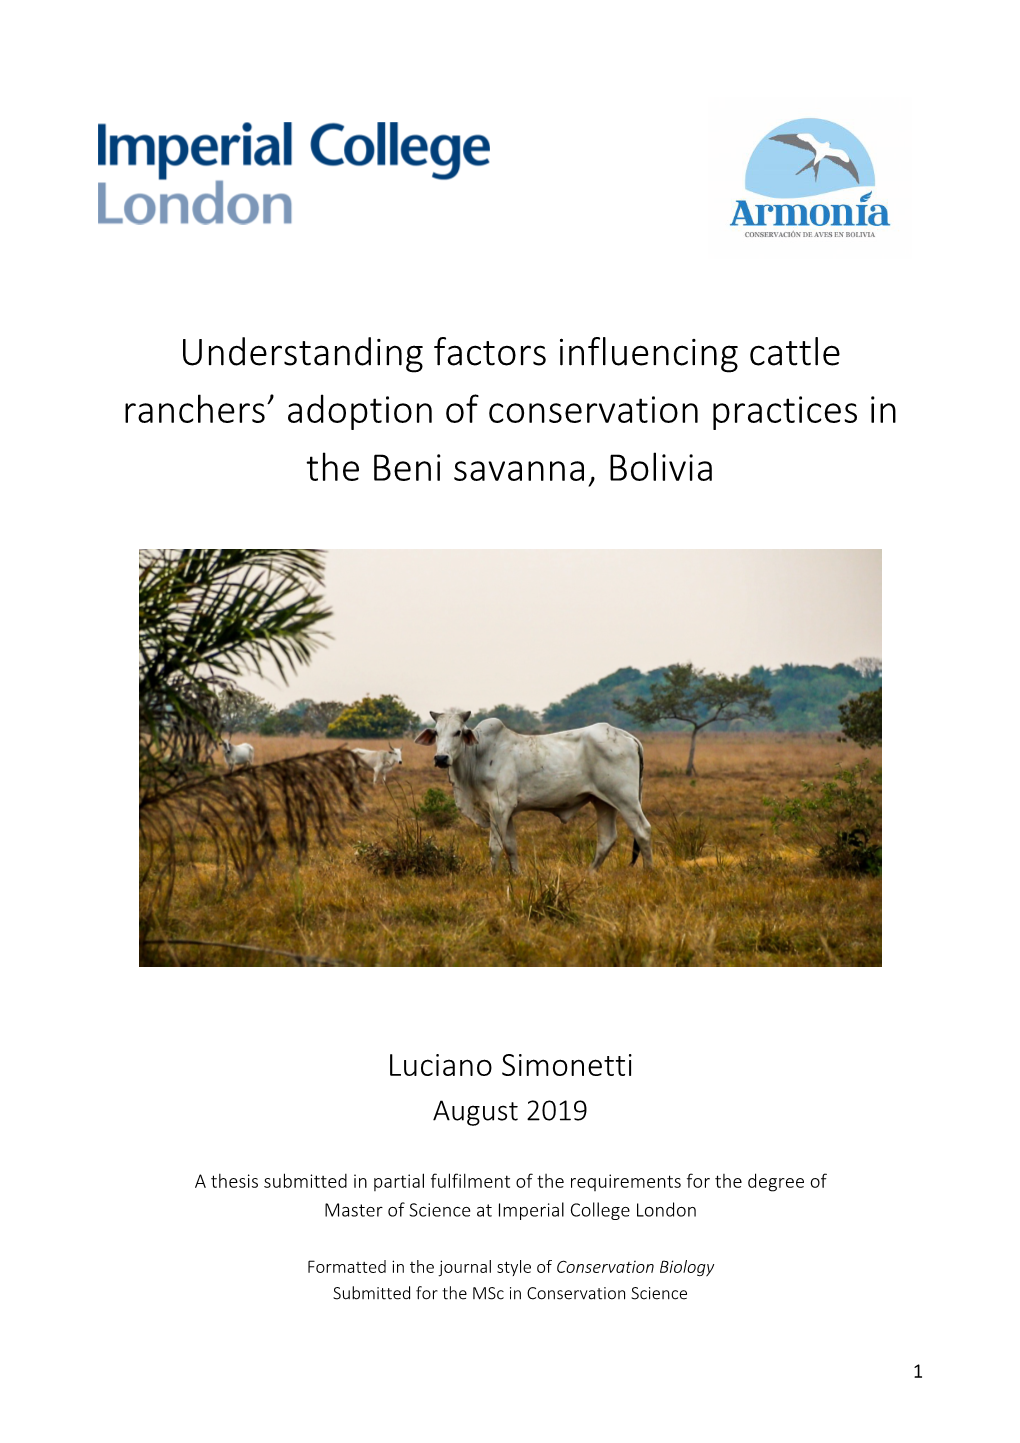 Understanding Factors Influencing Cattle Ranchers' Adoption of Conservation Practices in the Beni Savanna, Bolivia